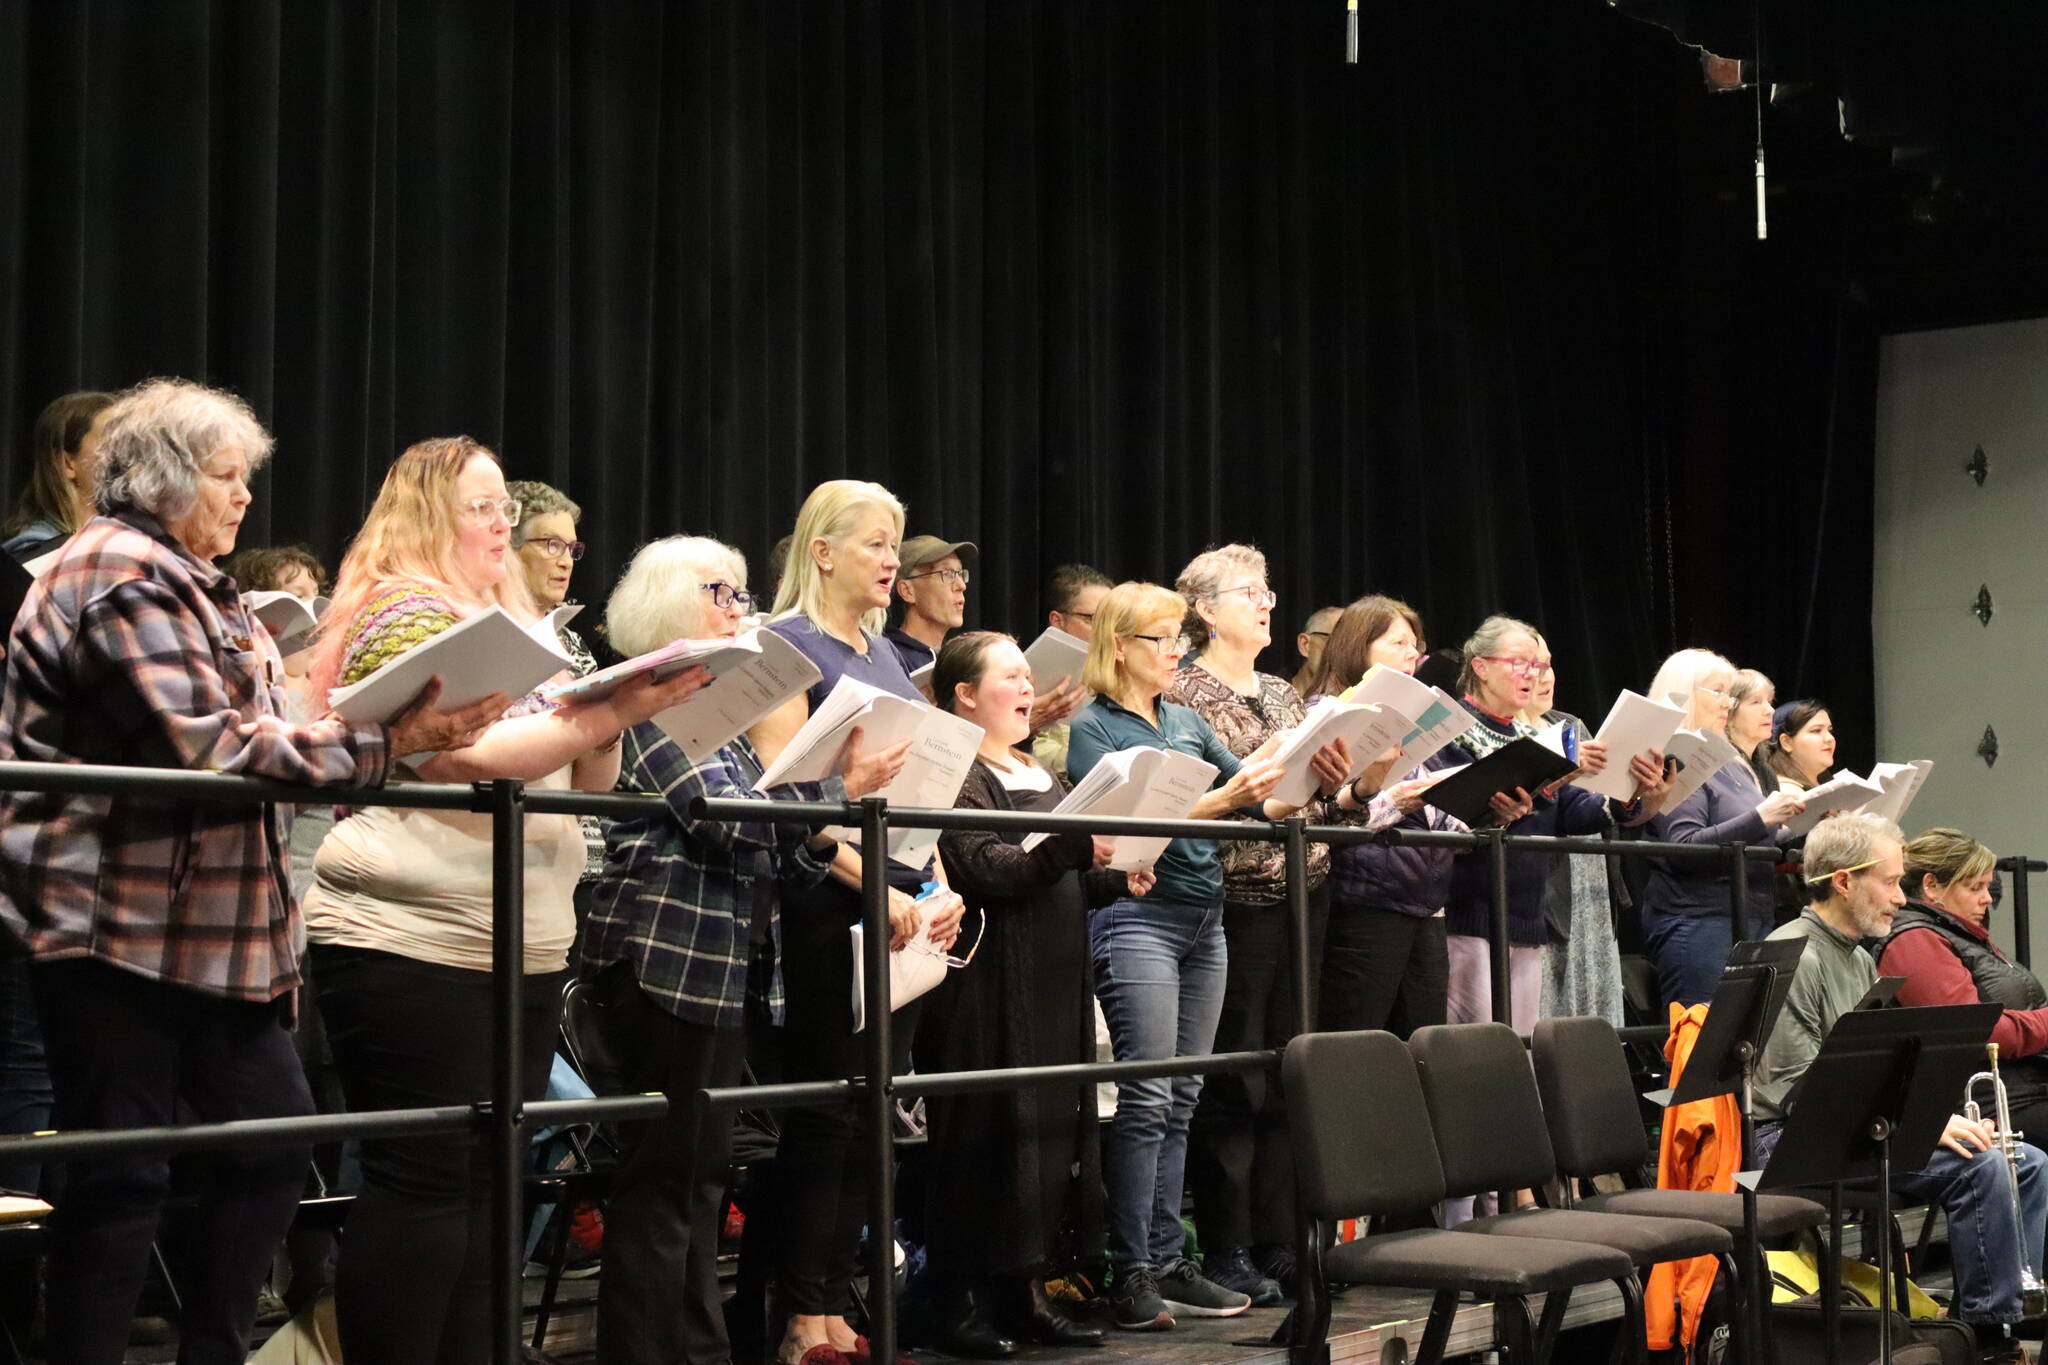 The concert version of “Candide,” a collaboration of Juneau Symphony and Juneau Lyric Opera to be staged this weekend at Juneau-Douglas High School: Yadaa.at Kalé, includes a 40-person chorus. (Meredith Jordan/ Juneau Empire)